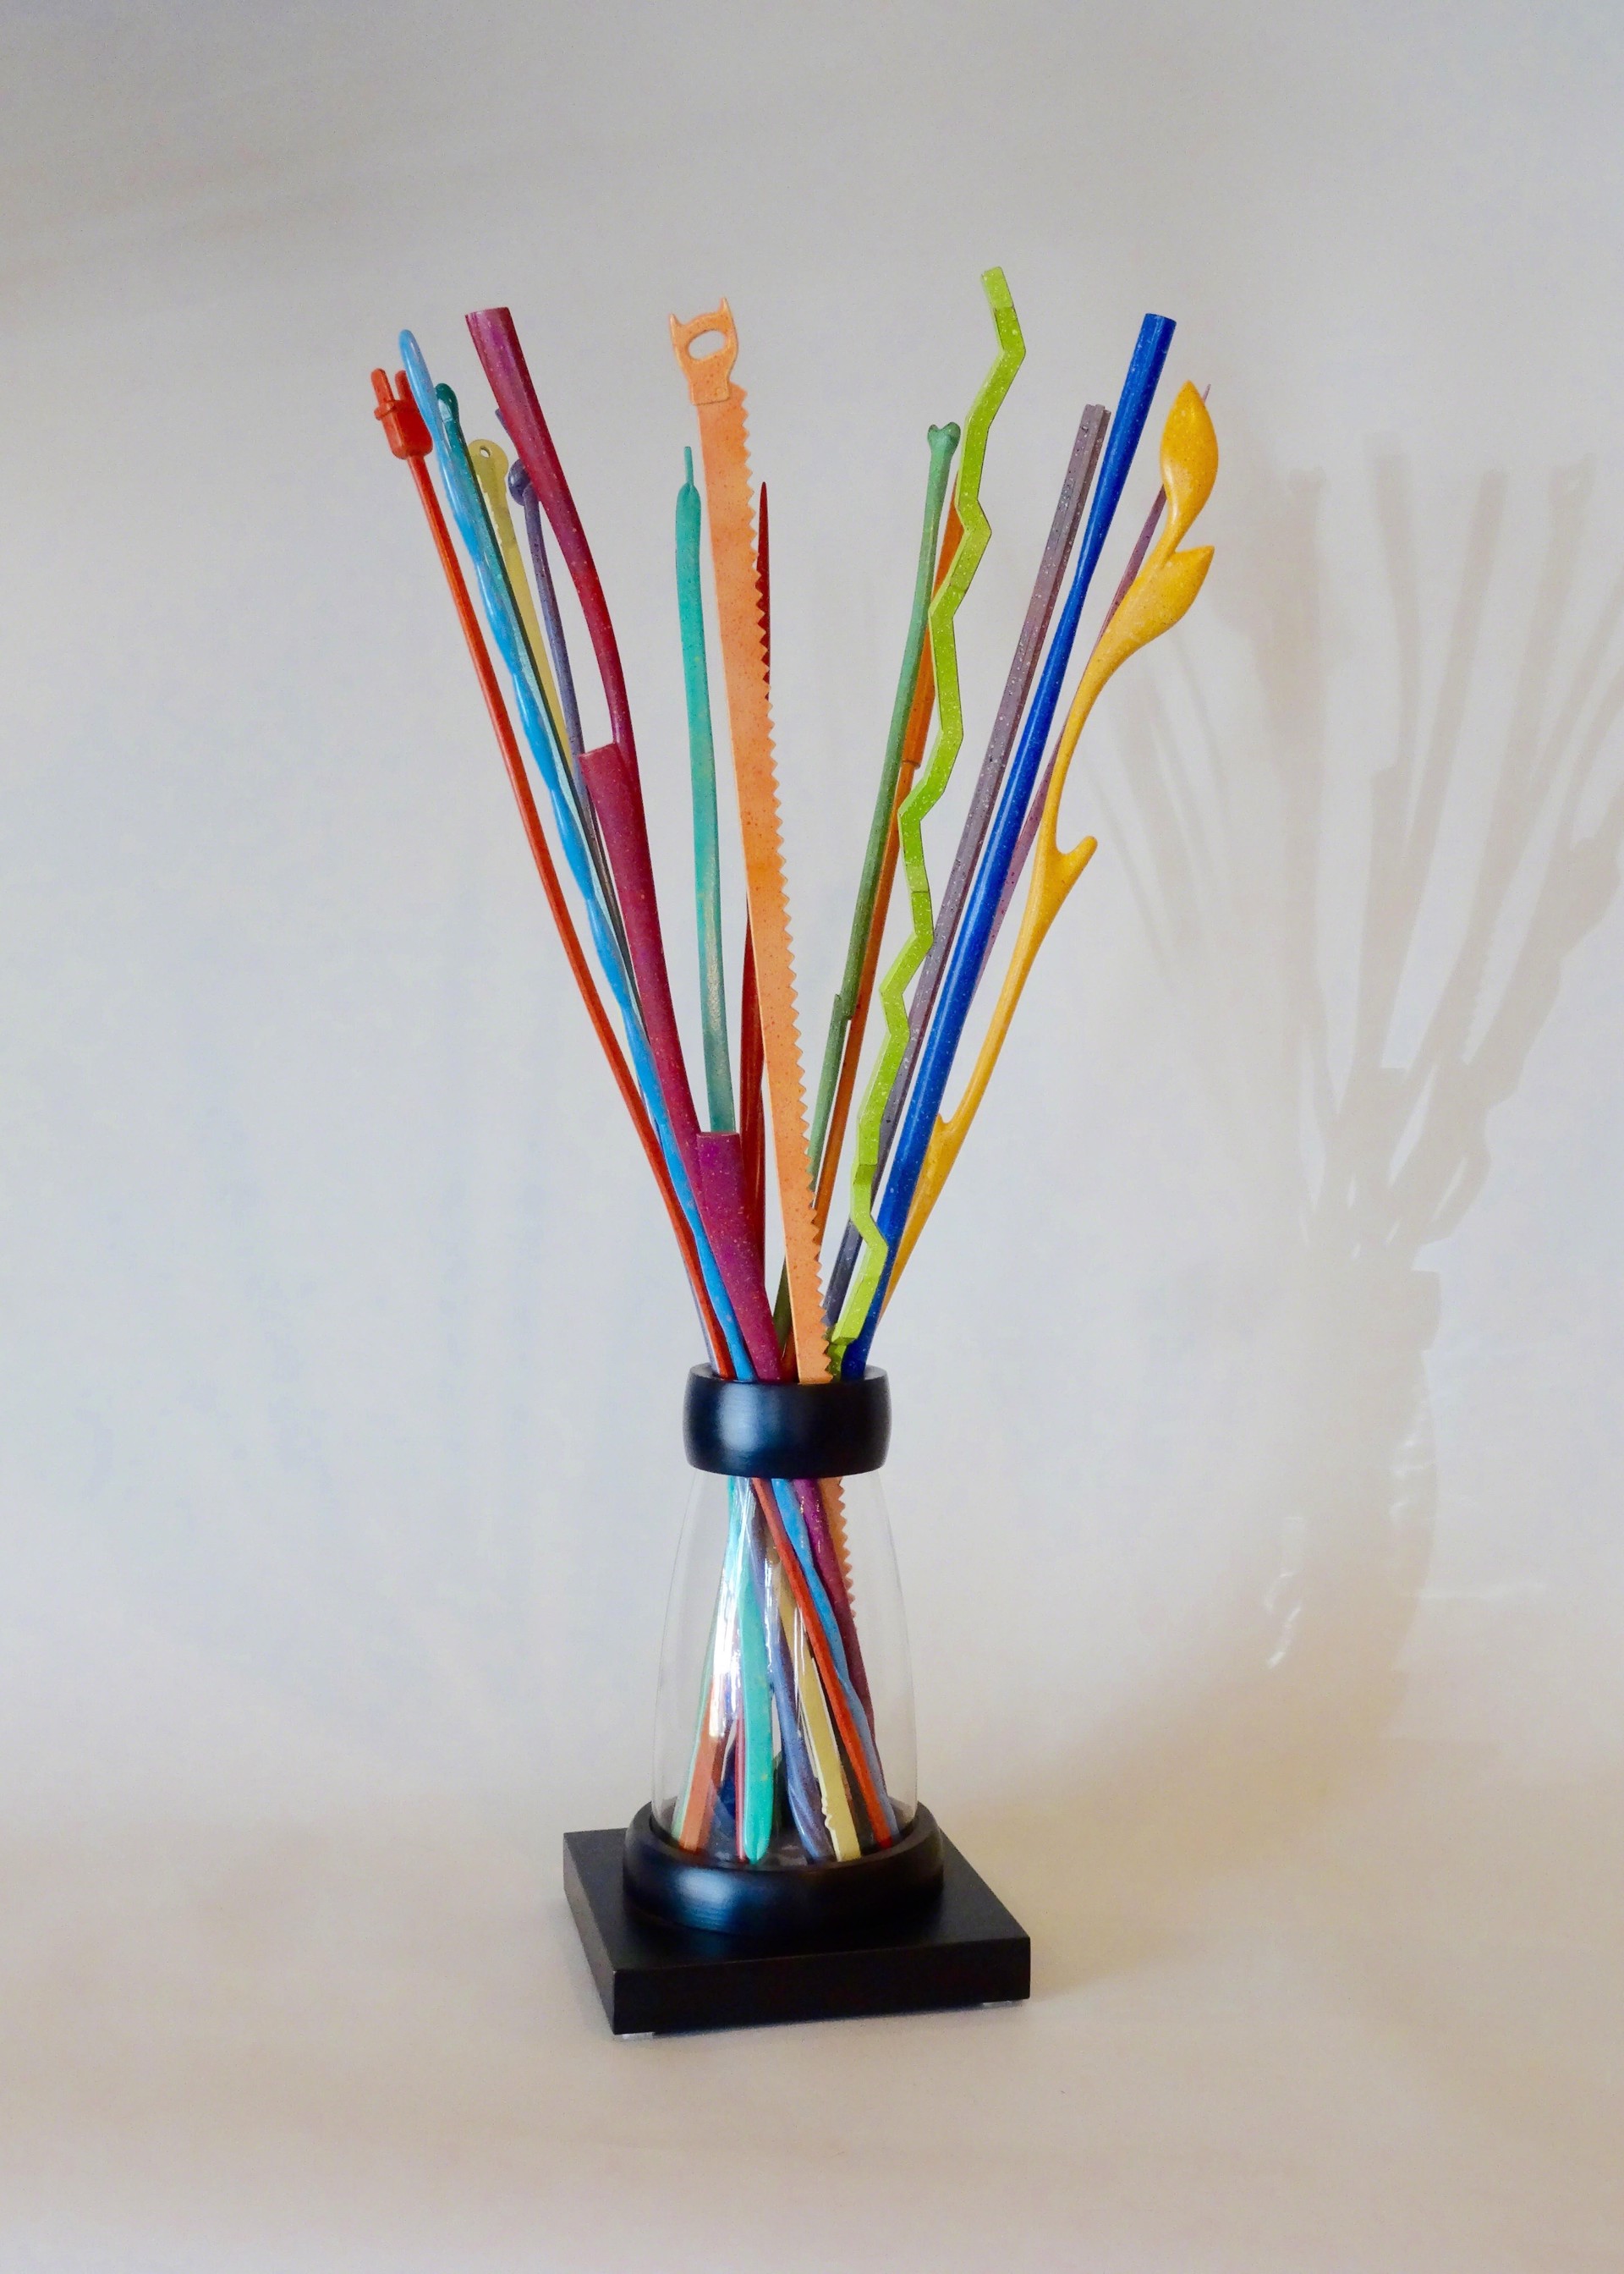 Vase of Colorful Sticks (SMALL) by Sean O'Meallie